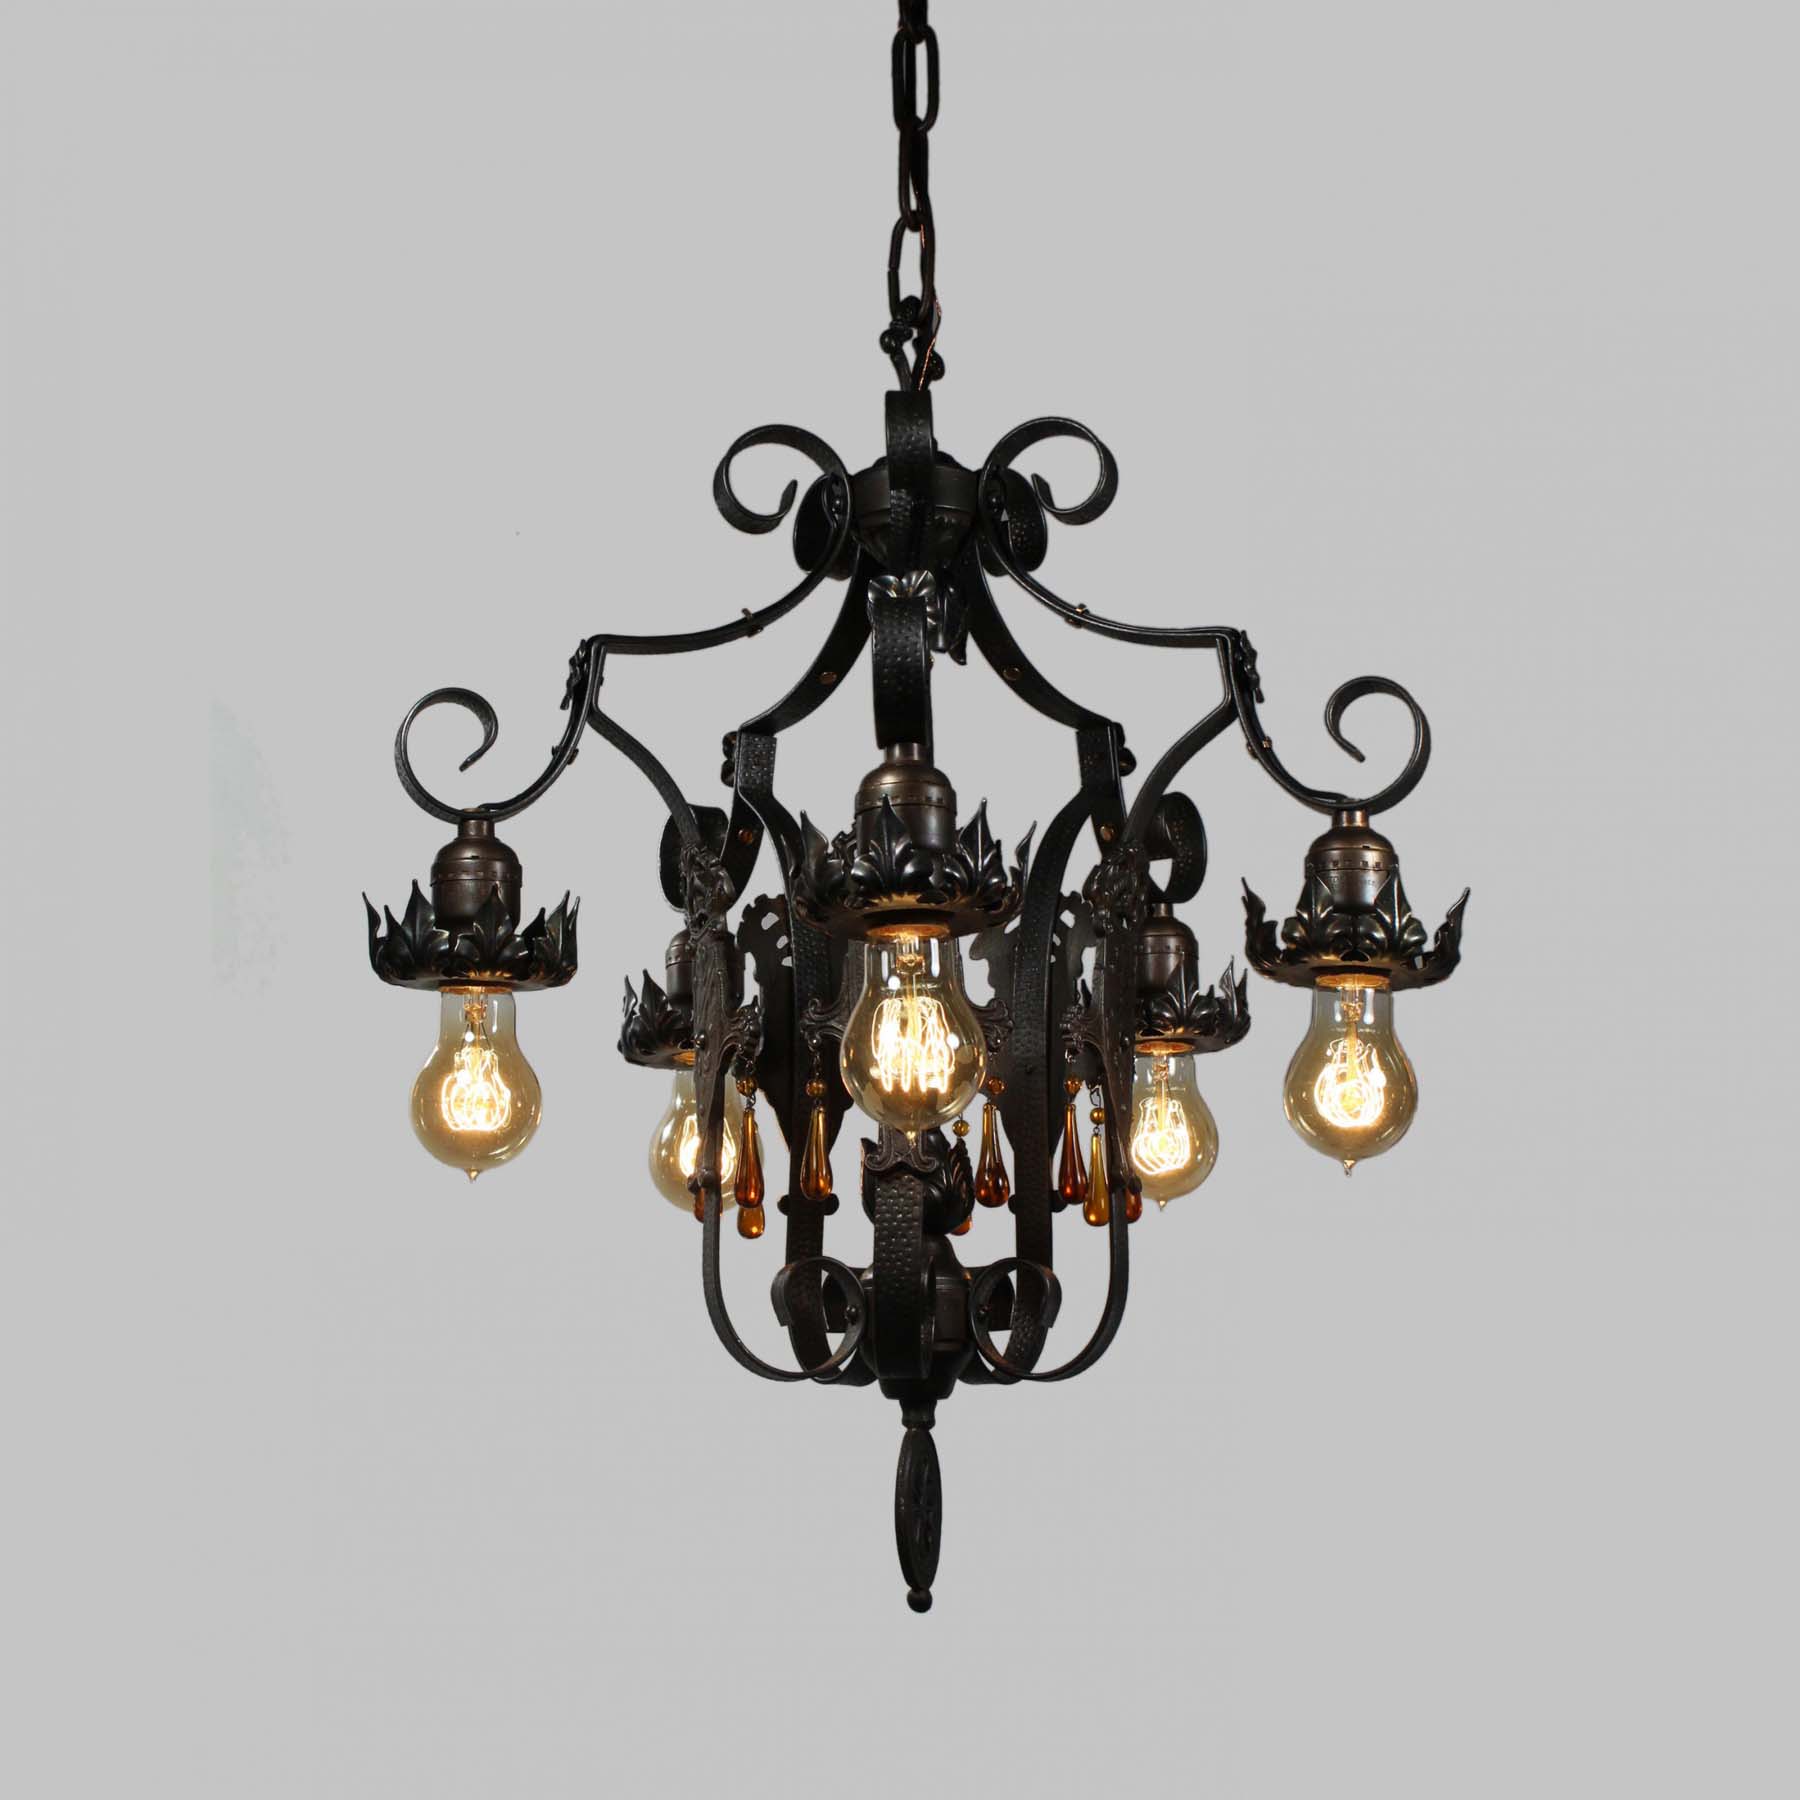 Antique Spanish Revival Five-Light Iron Chandelier, Early 1900s-70502